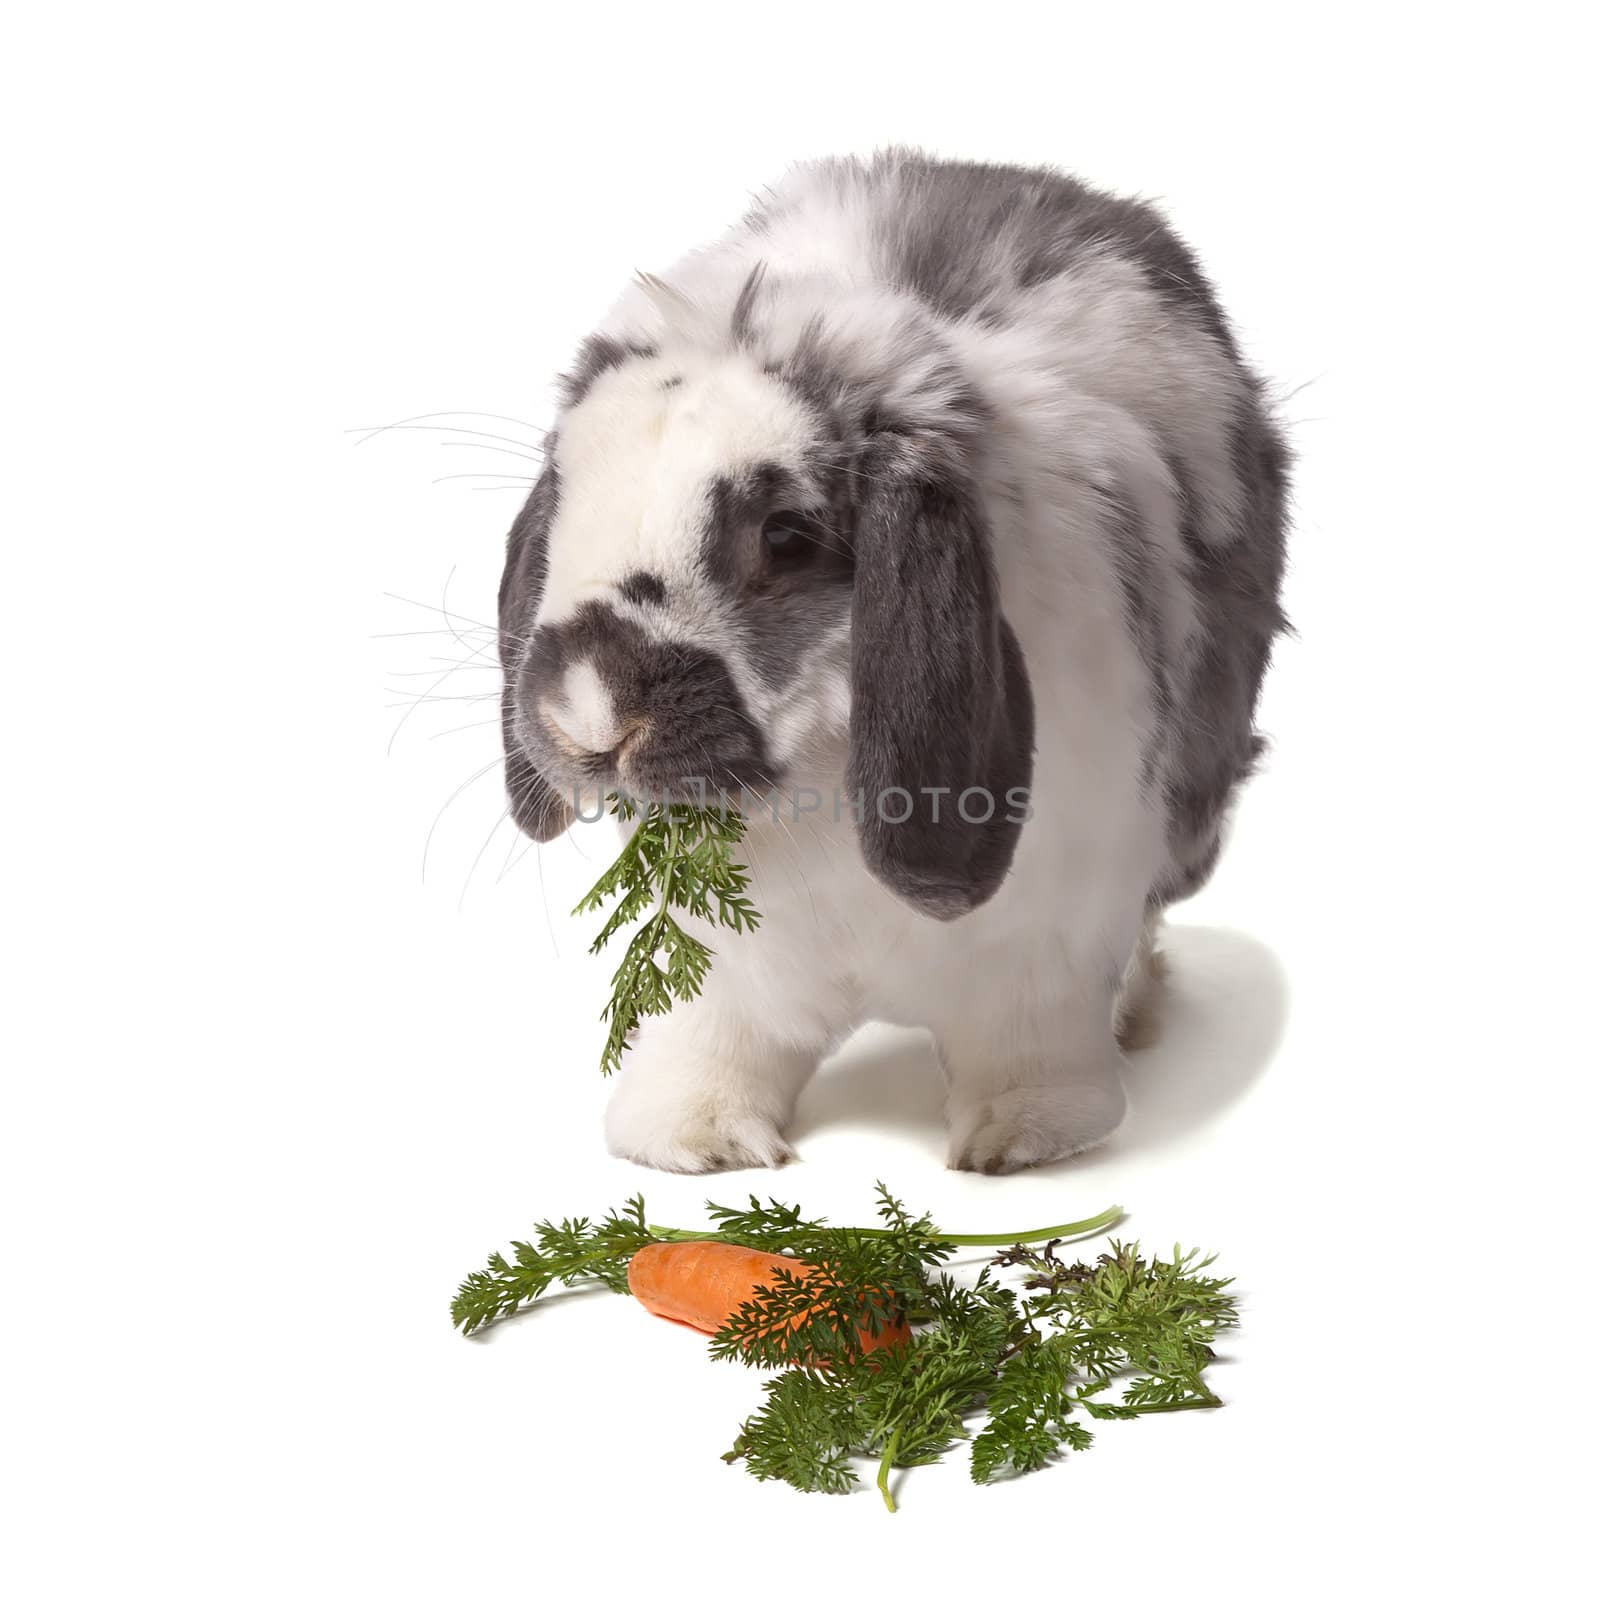 Cute Grey and White Lop Eared Rabbit eating Carrot and Green Vegetables On White Background